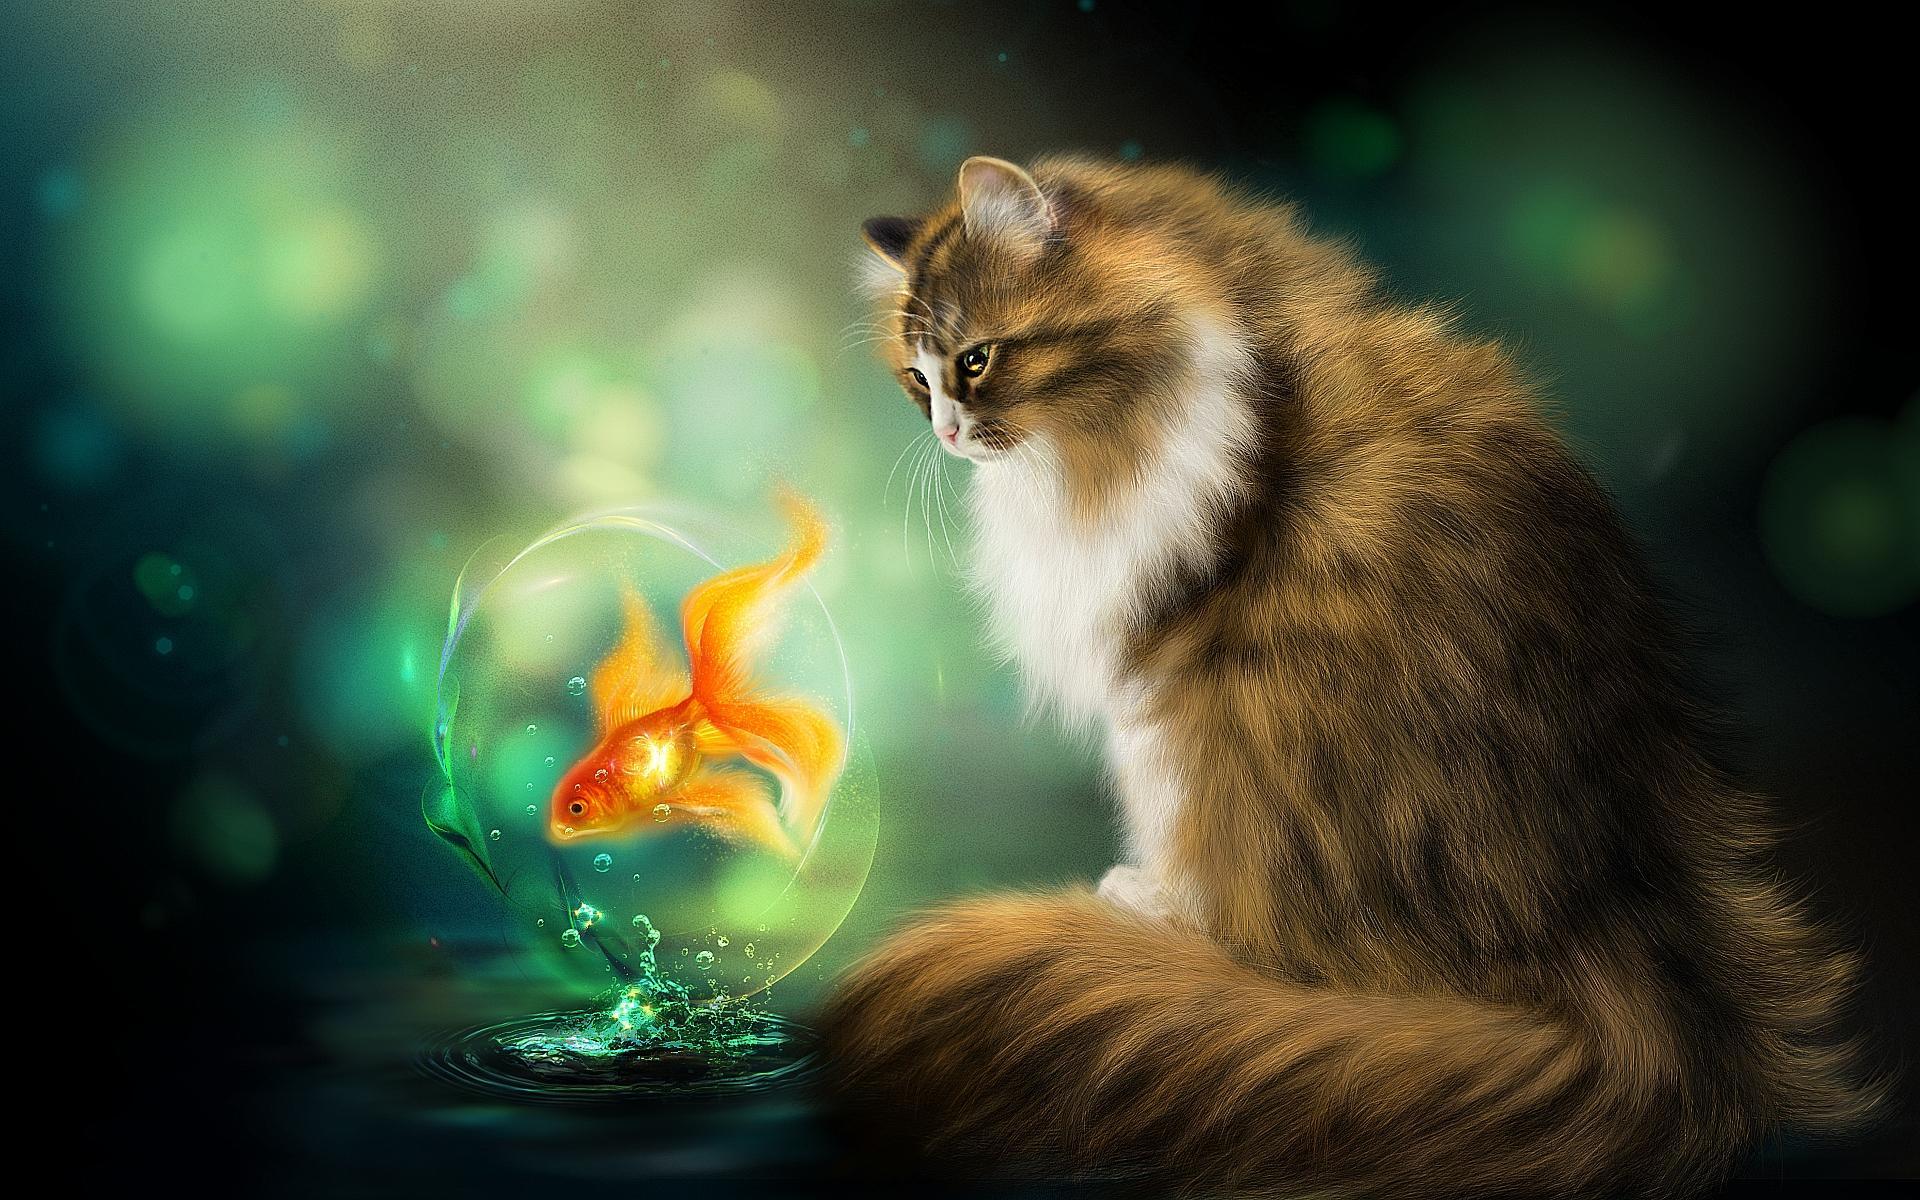 Painting of Cat and Goldfish HD Wallpaper. Background Image